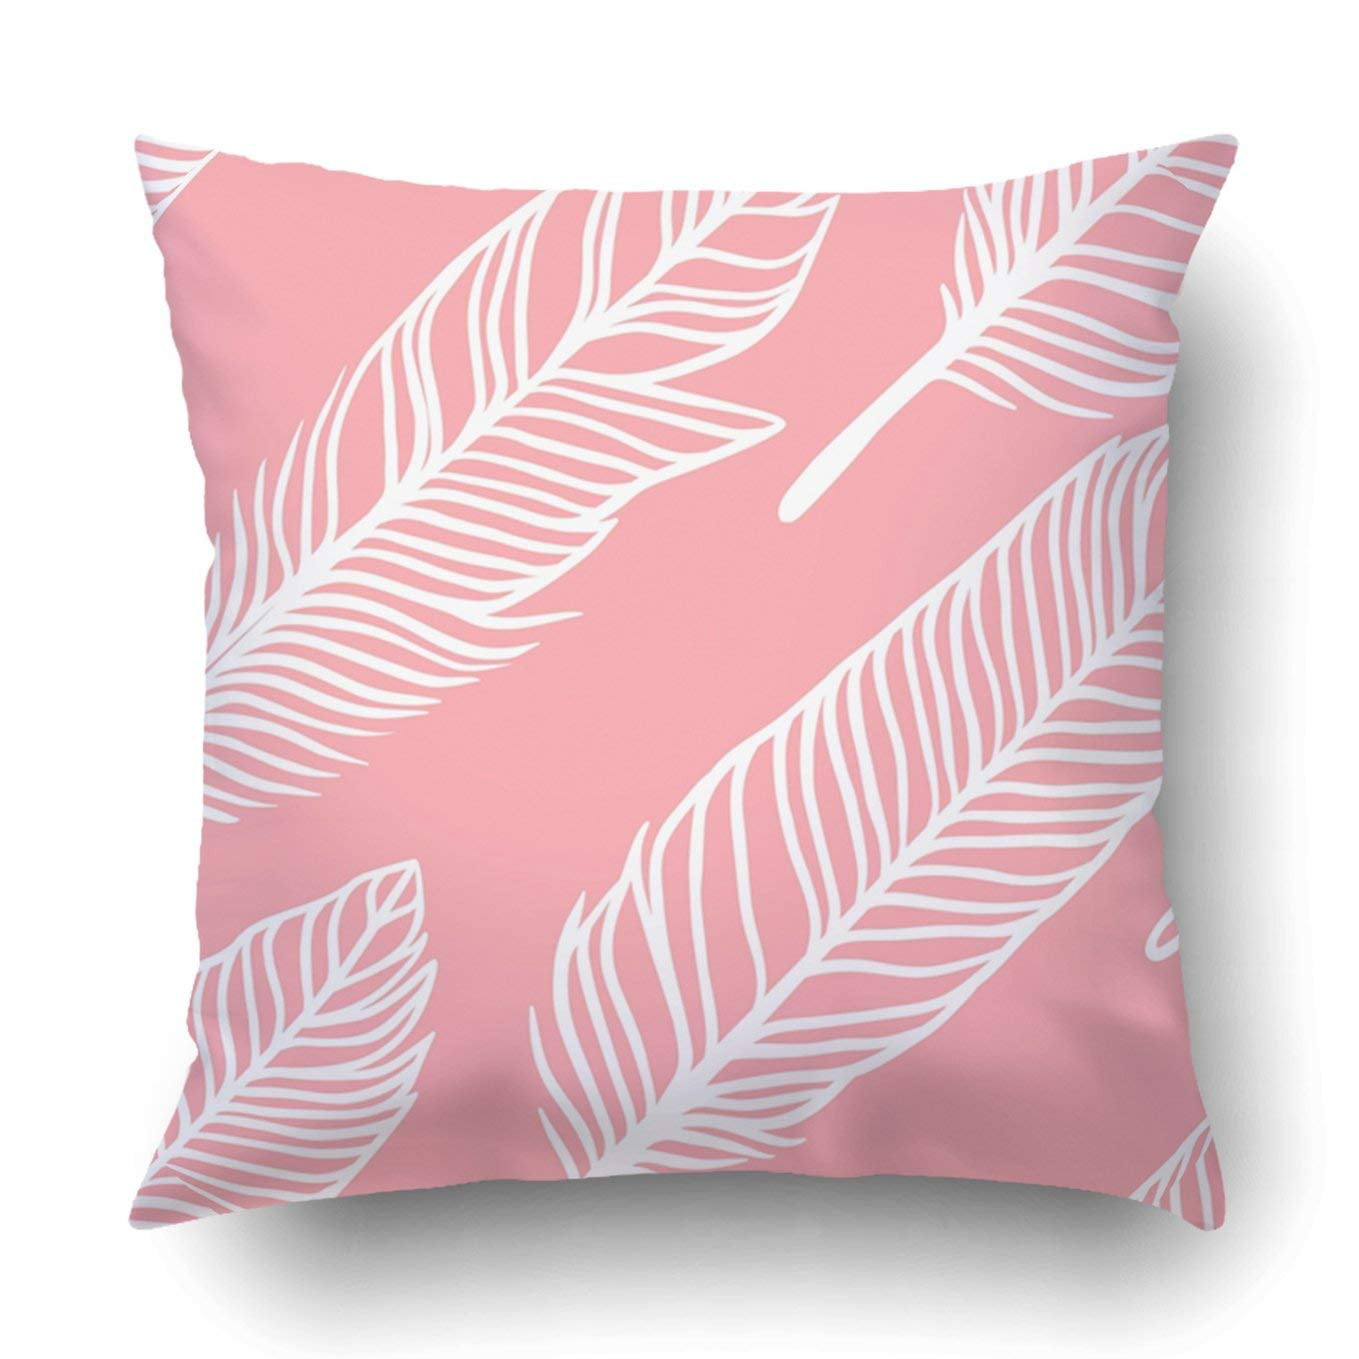 16x16 Multicolor Boho Chic Chick Home Decor and More Modern Boho Chic Feathers in Mint Green Black and Blush Pink Throw Pillow 